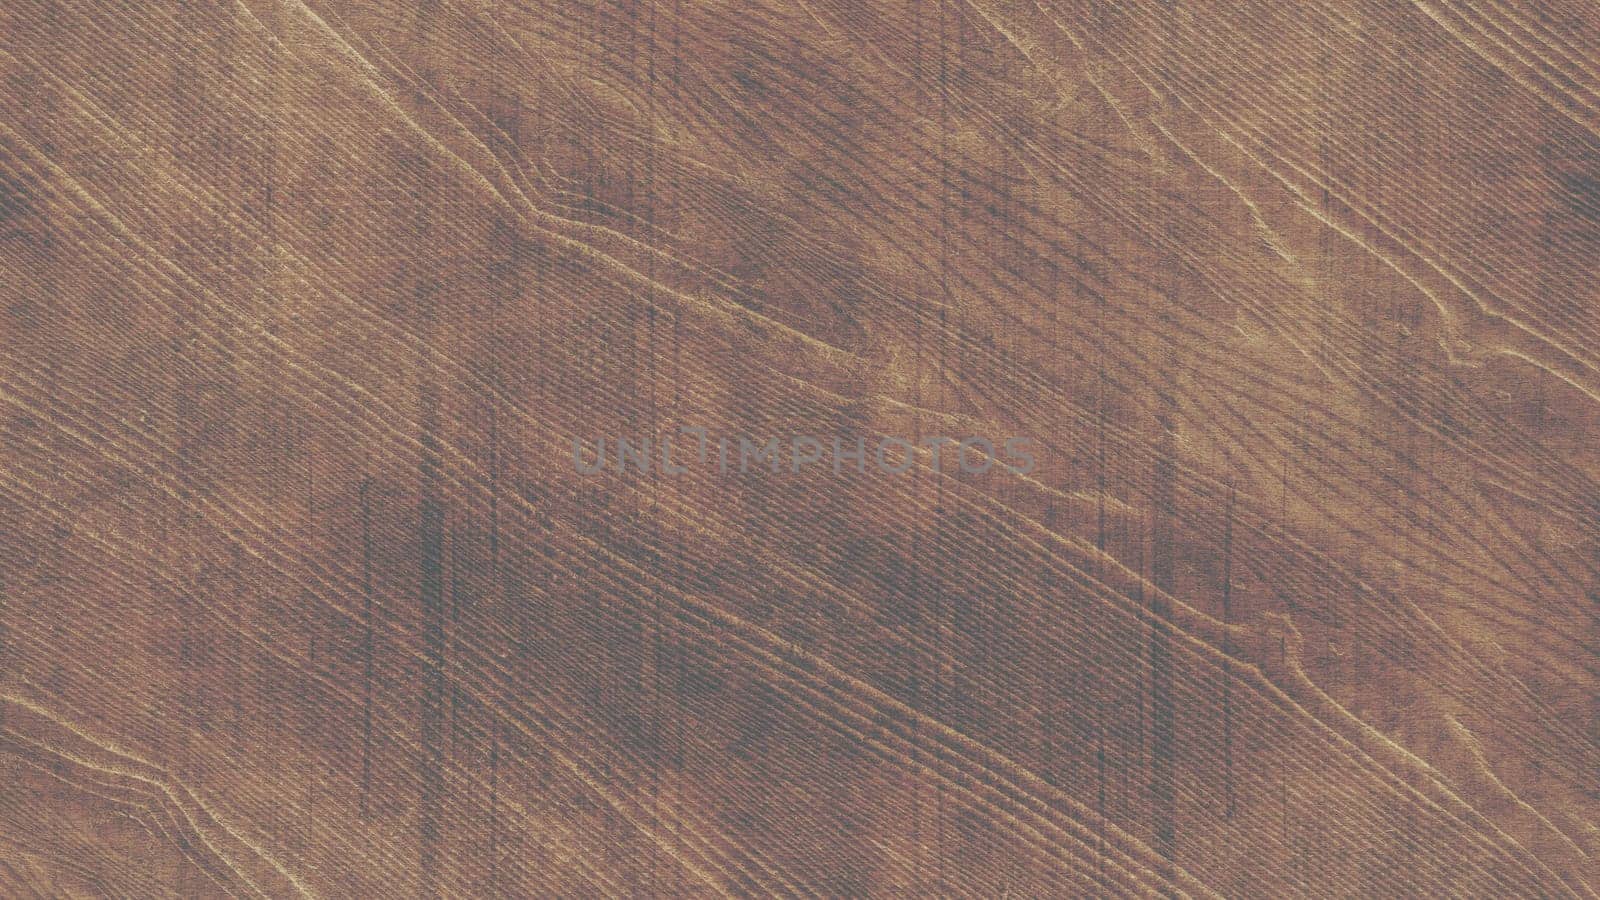 Natural wooden texture background view